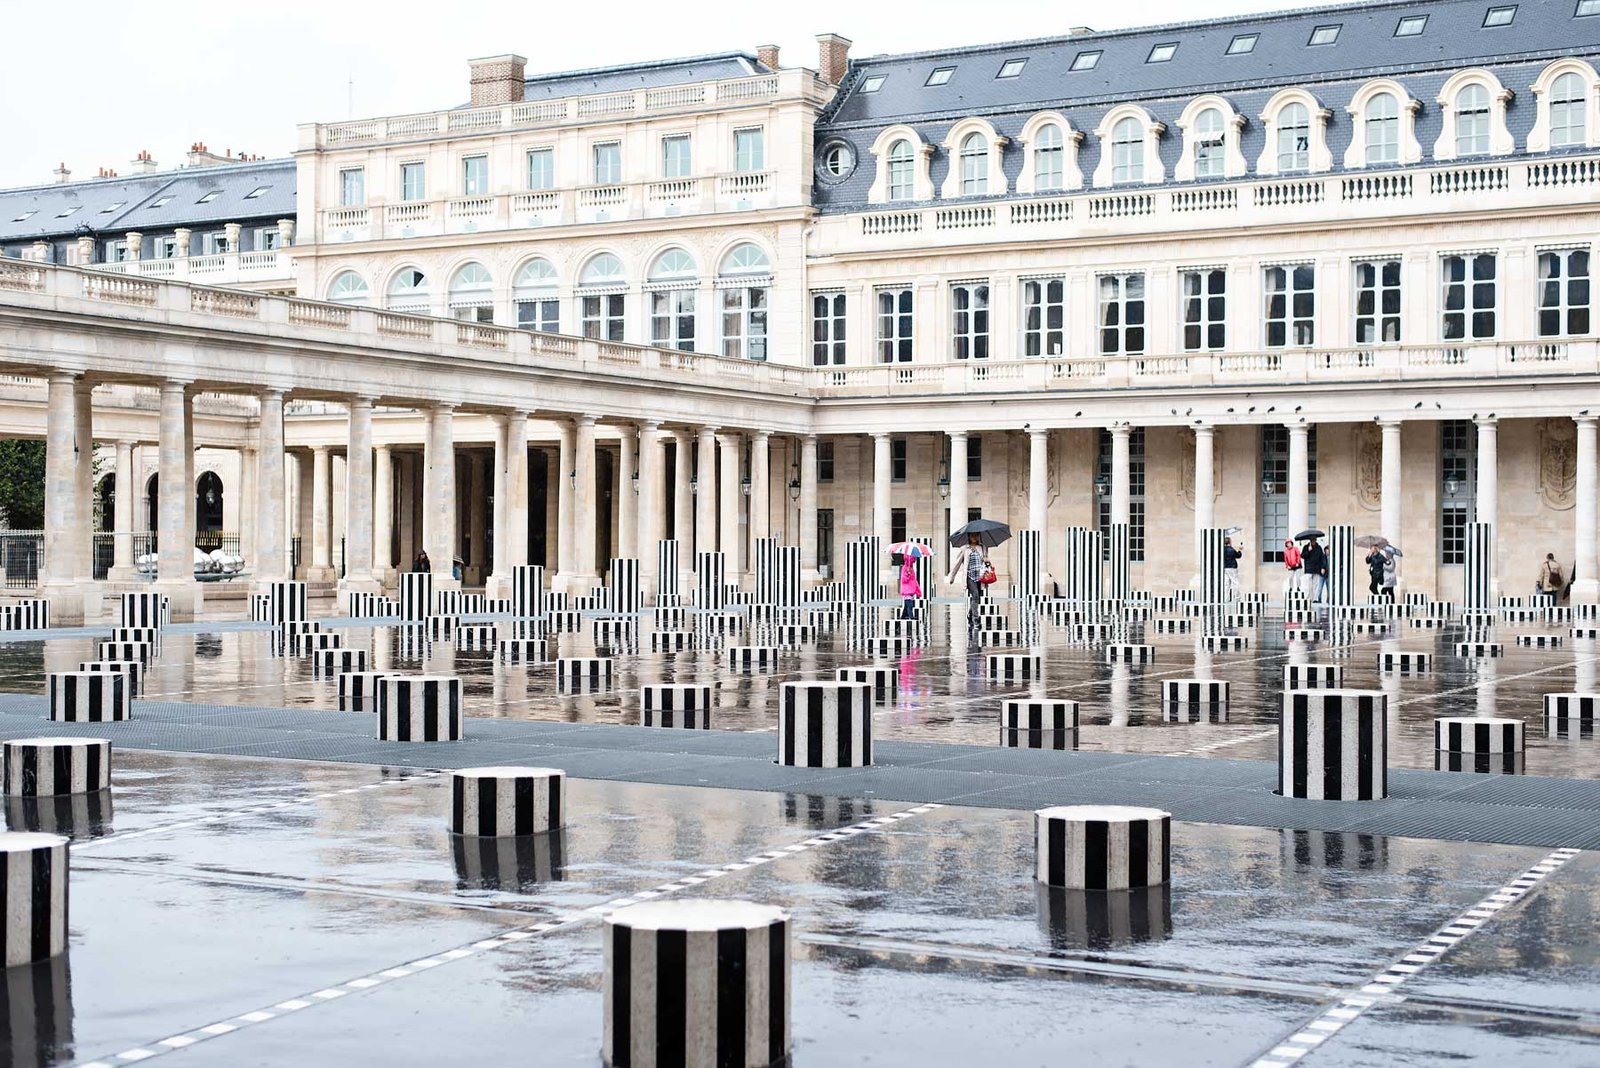 Ten amazing new places I discovered in Paris - Palais Royal